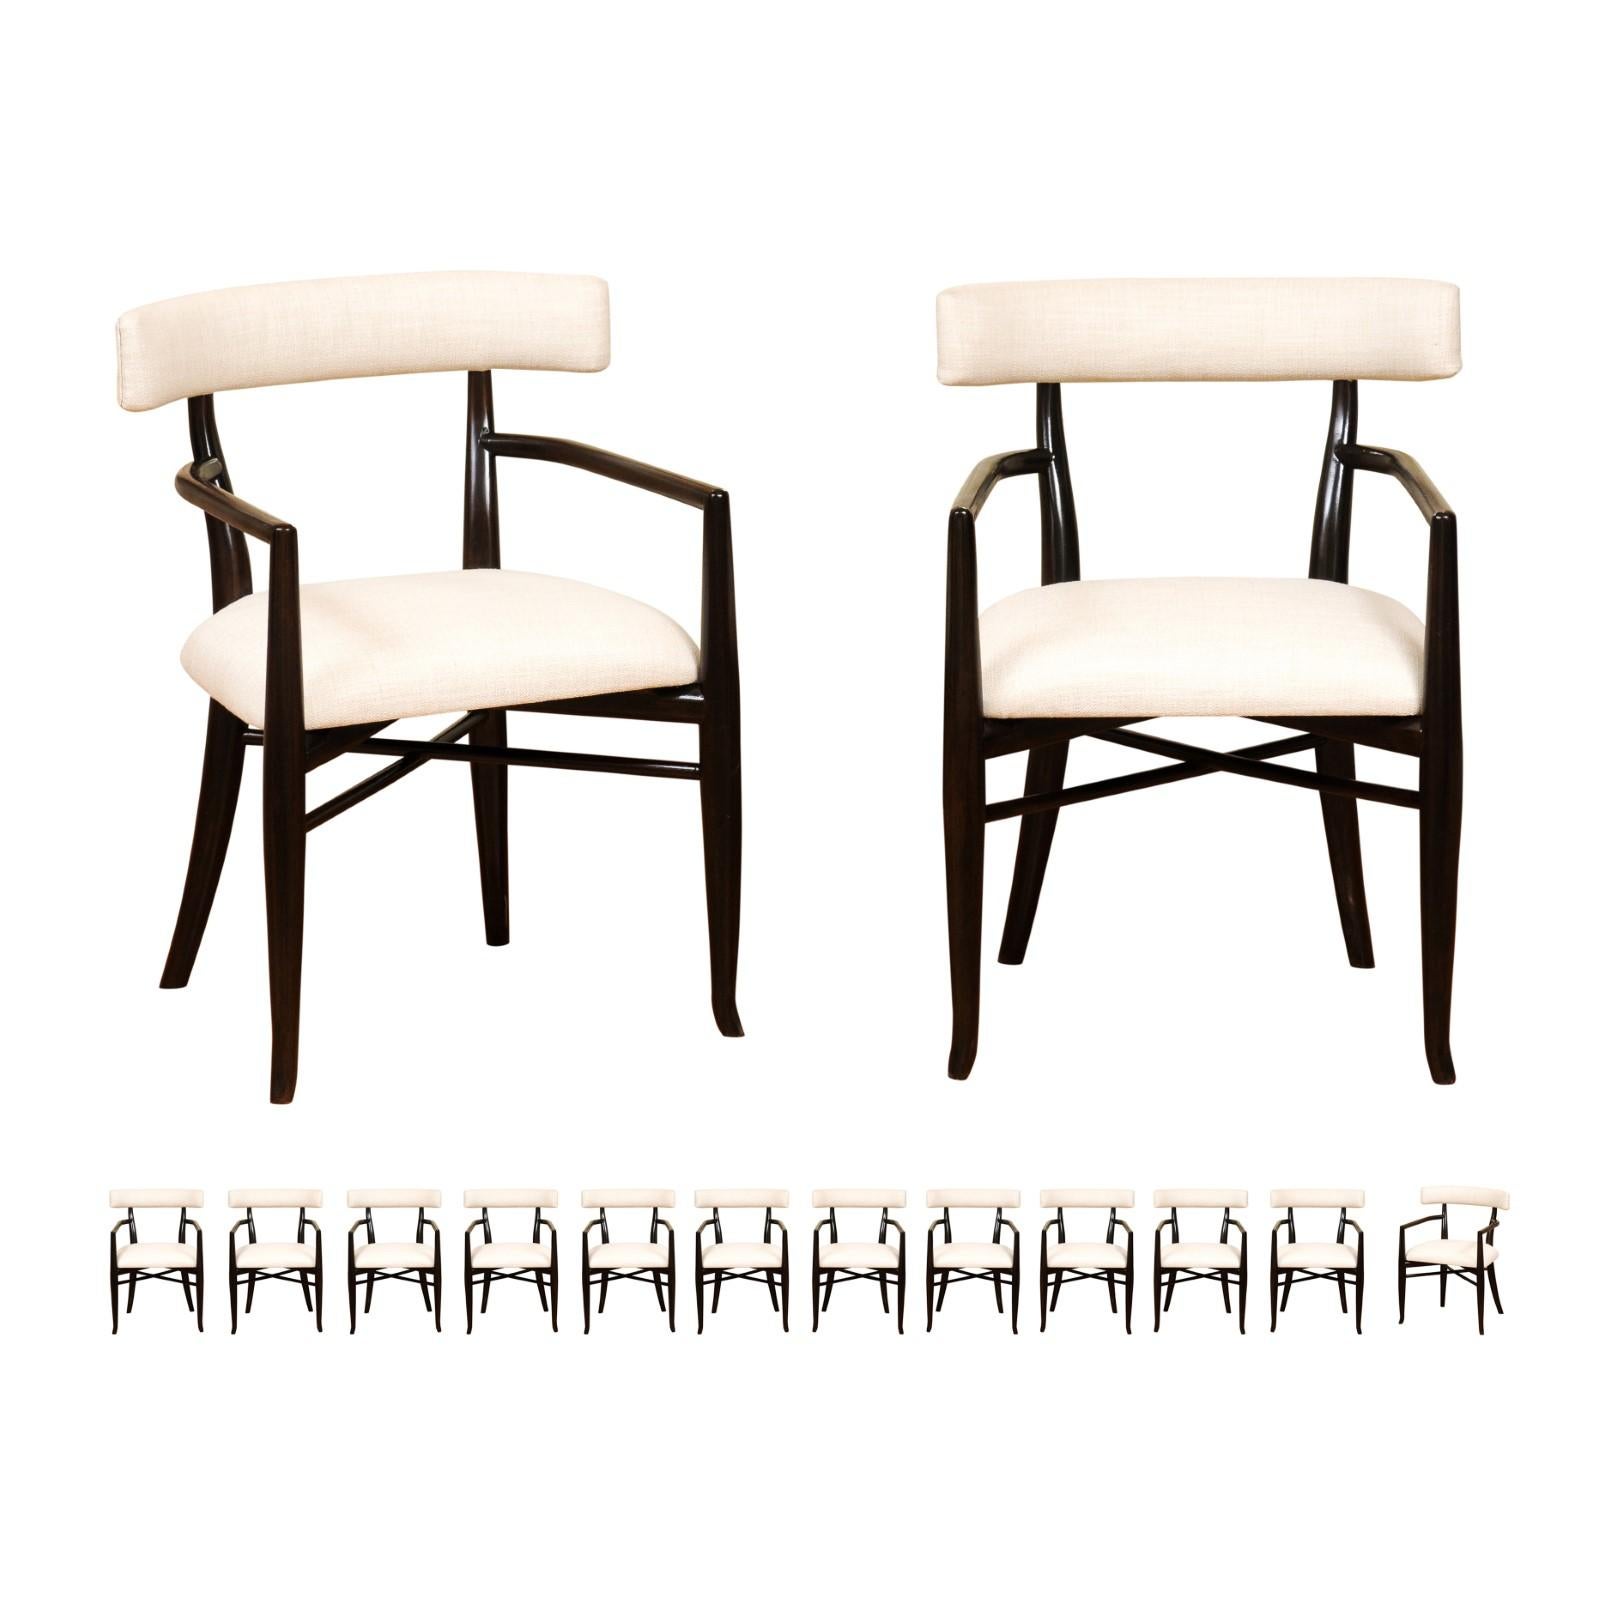 All ARMS, Stellar Set of 14 of Klismos Dining Chairs by Robsjohn-Gibbings For Sale 11